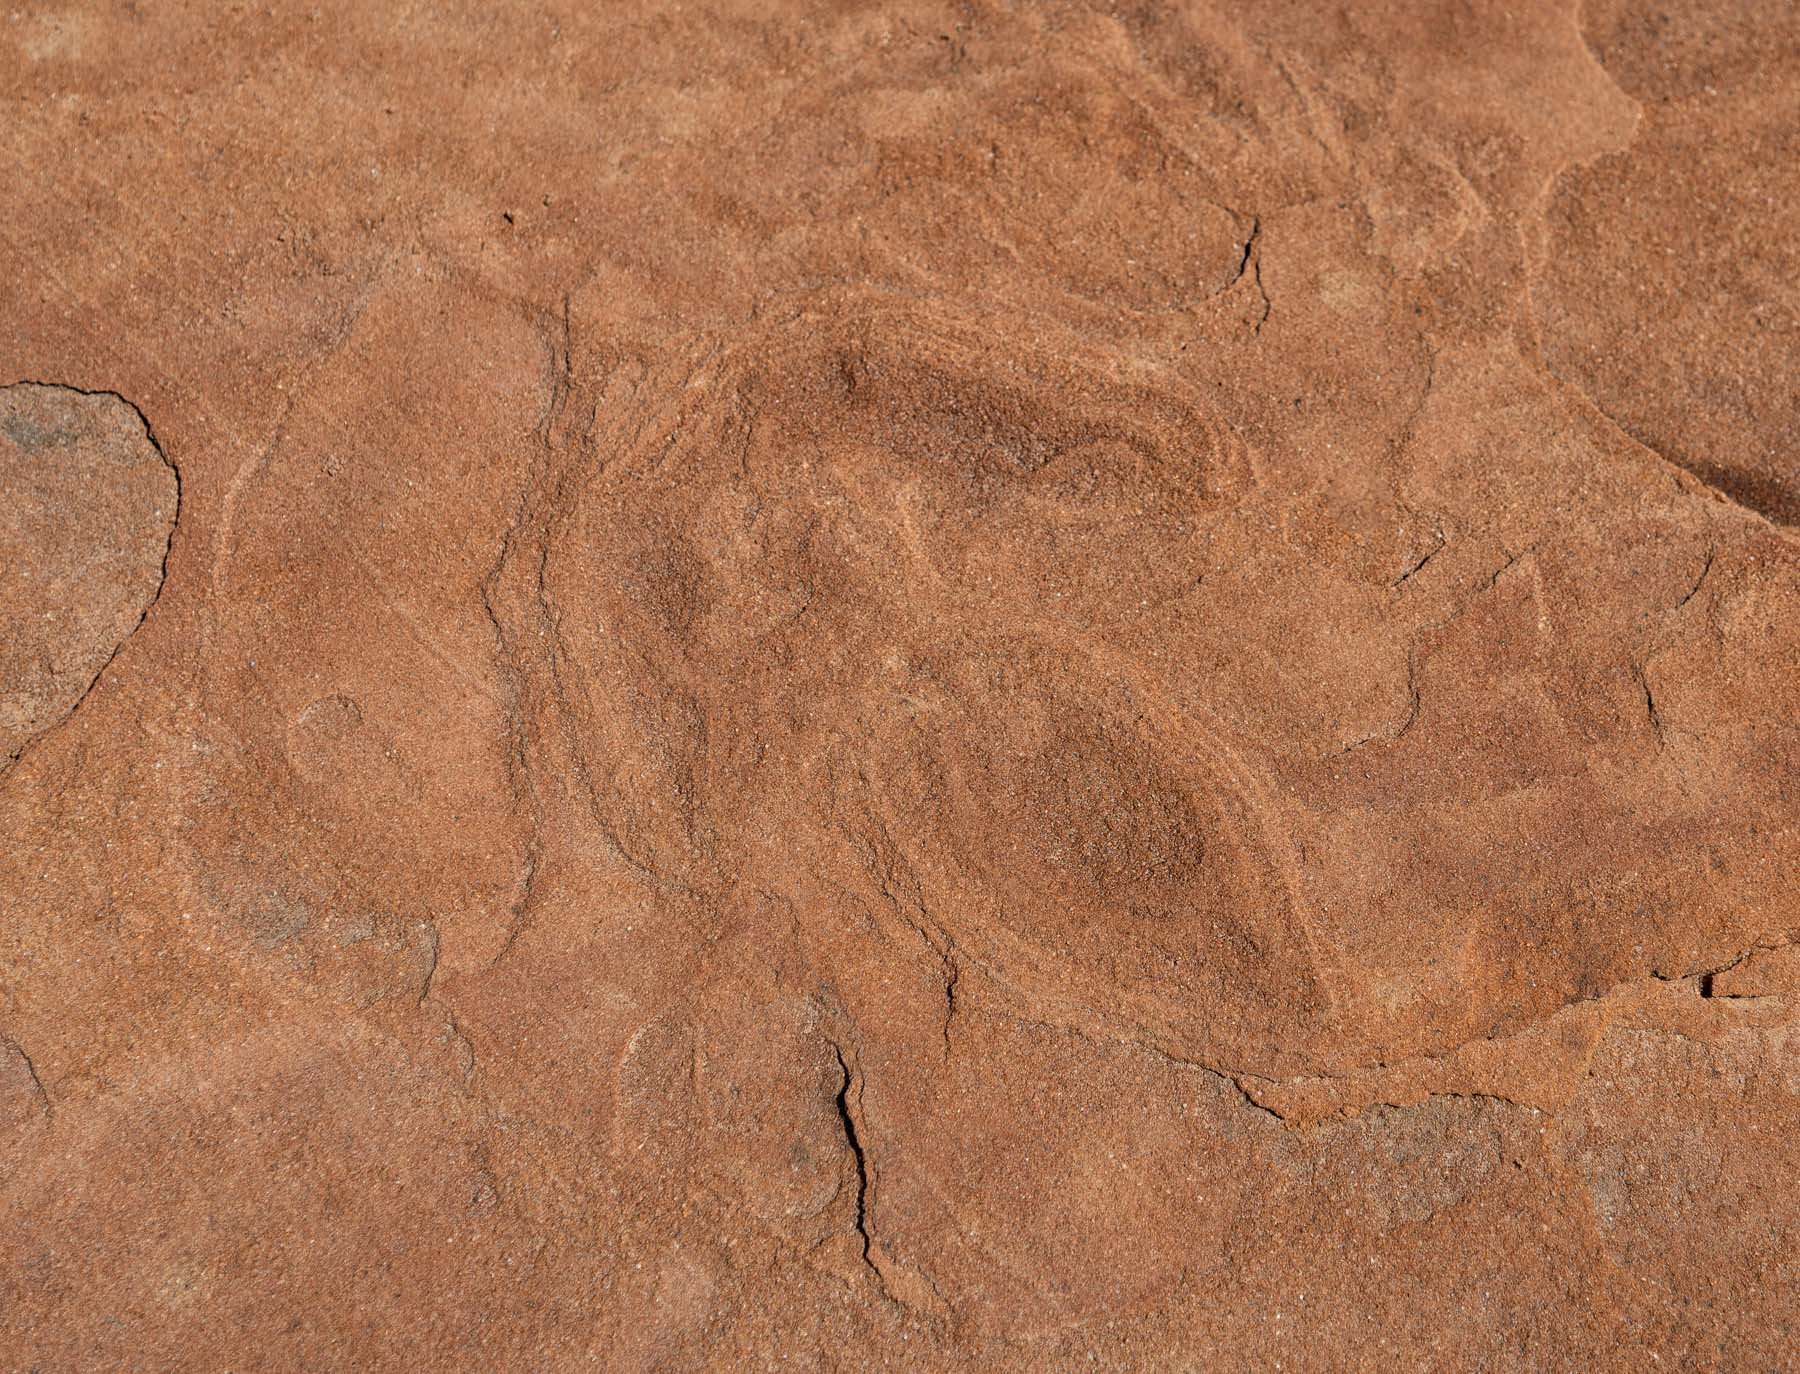 Dinosaur Track about 30 east feet of the trackway in Coyote Buttes North  